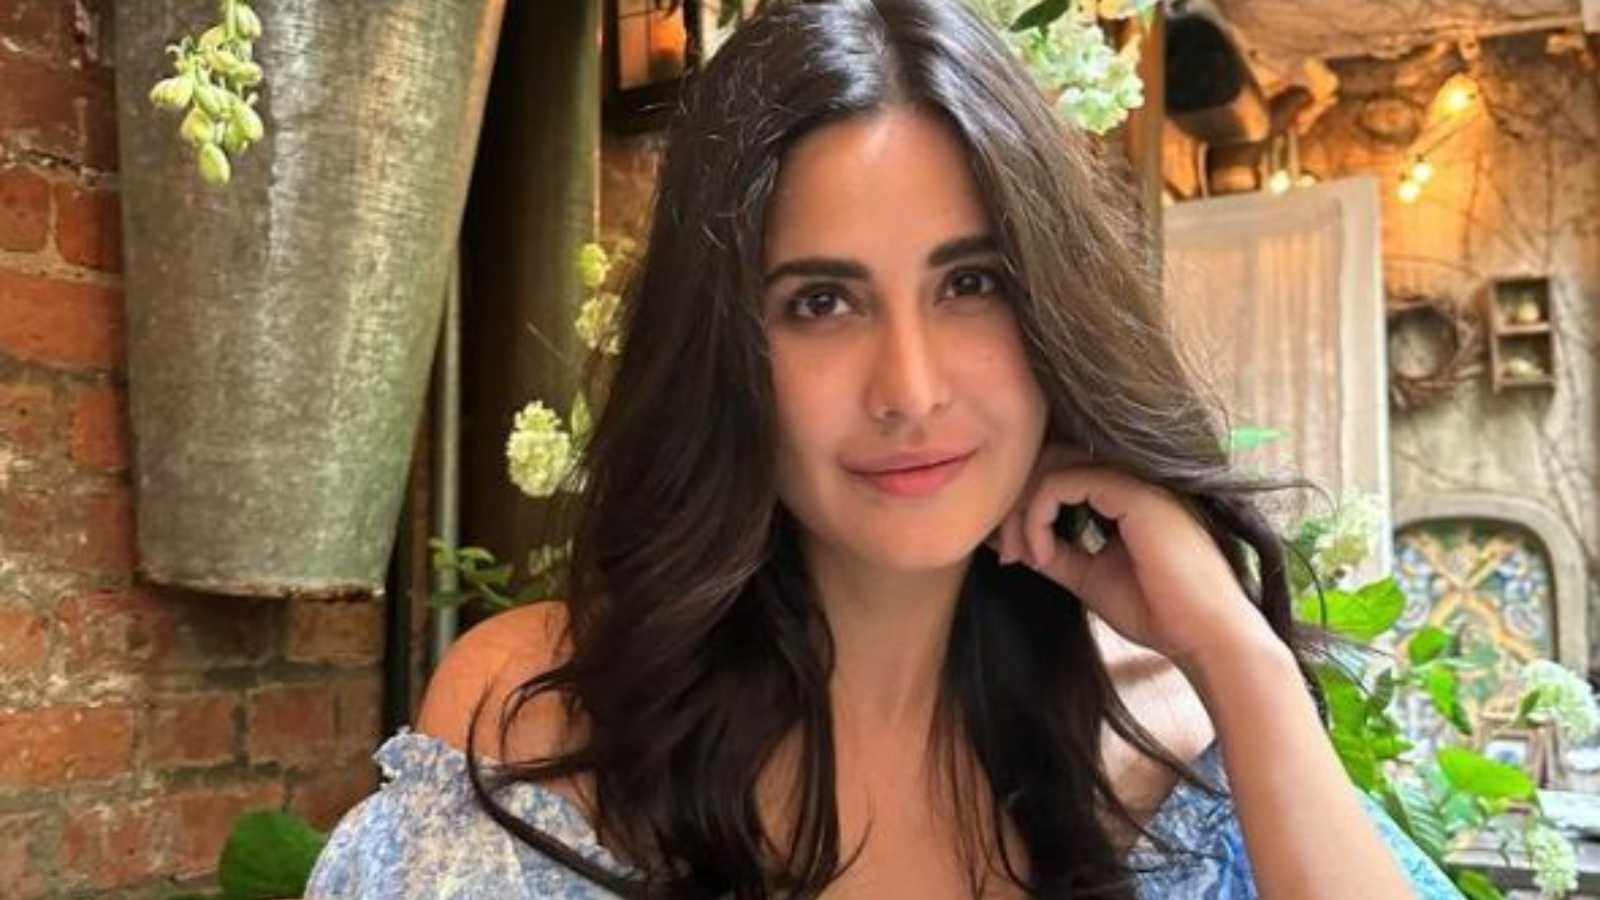 Katrina Kaif reacts to being tagged as 'hardworking', reveals Hrithik Roshan once told her she has worker's hands